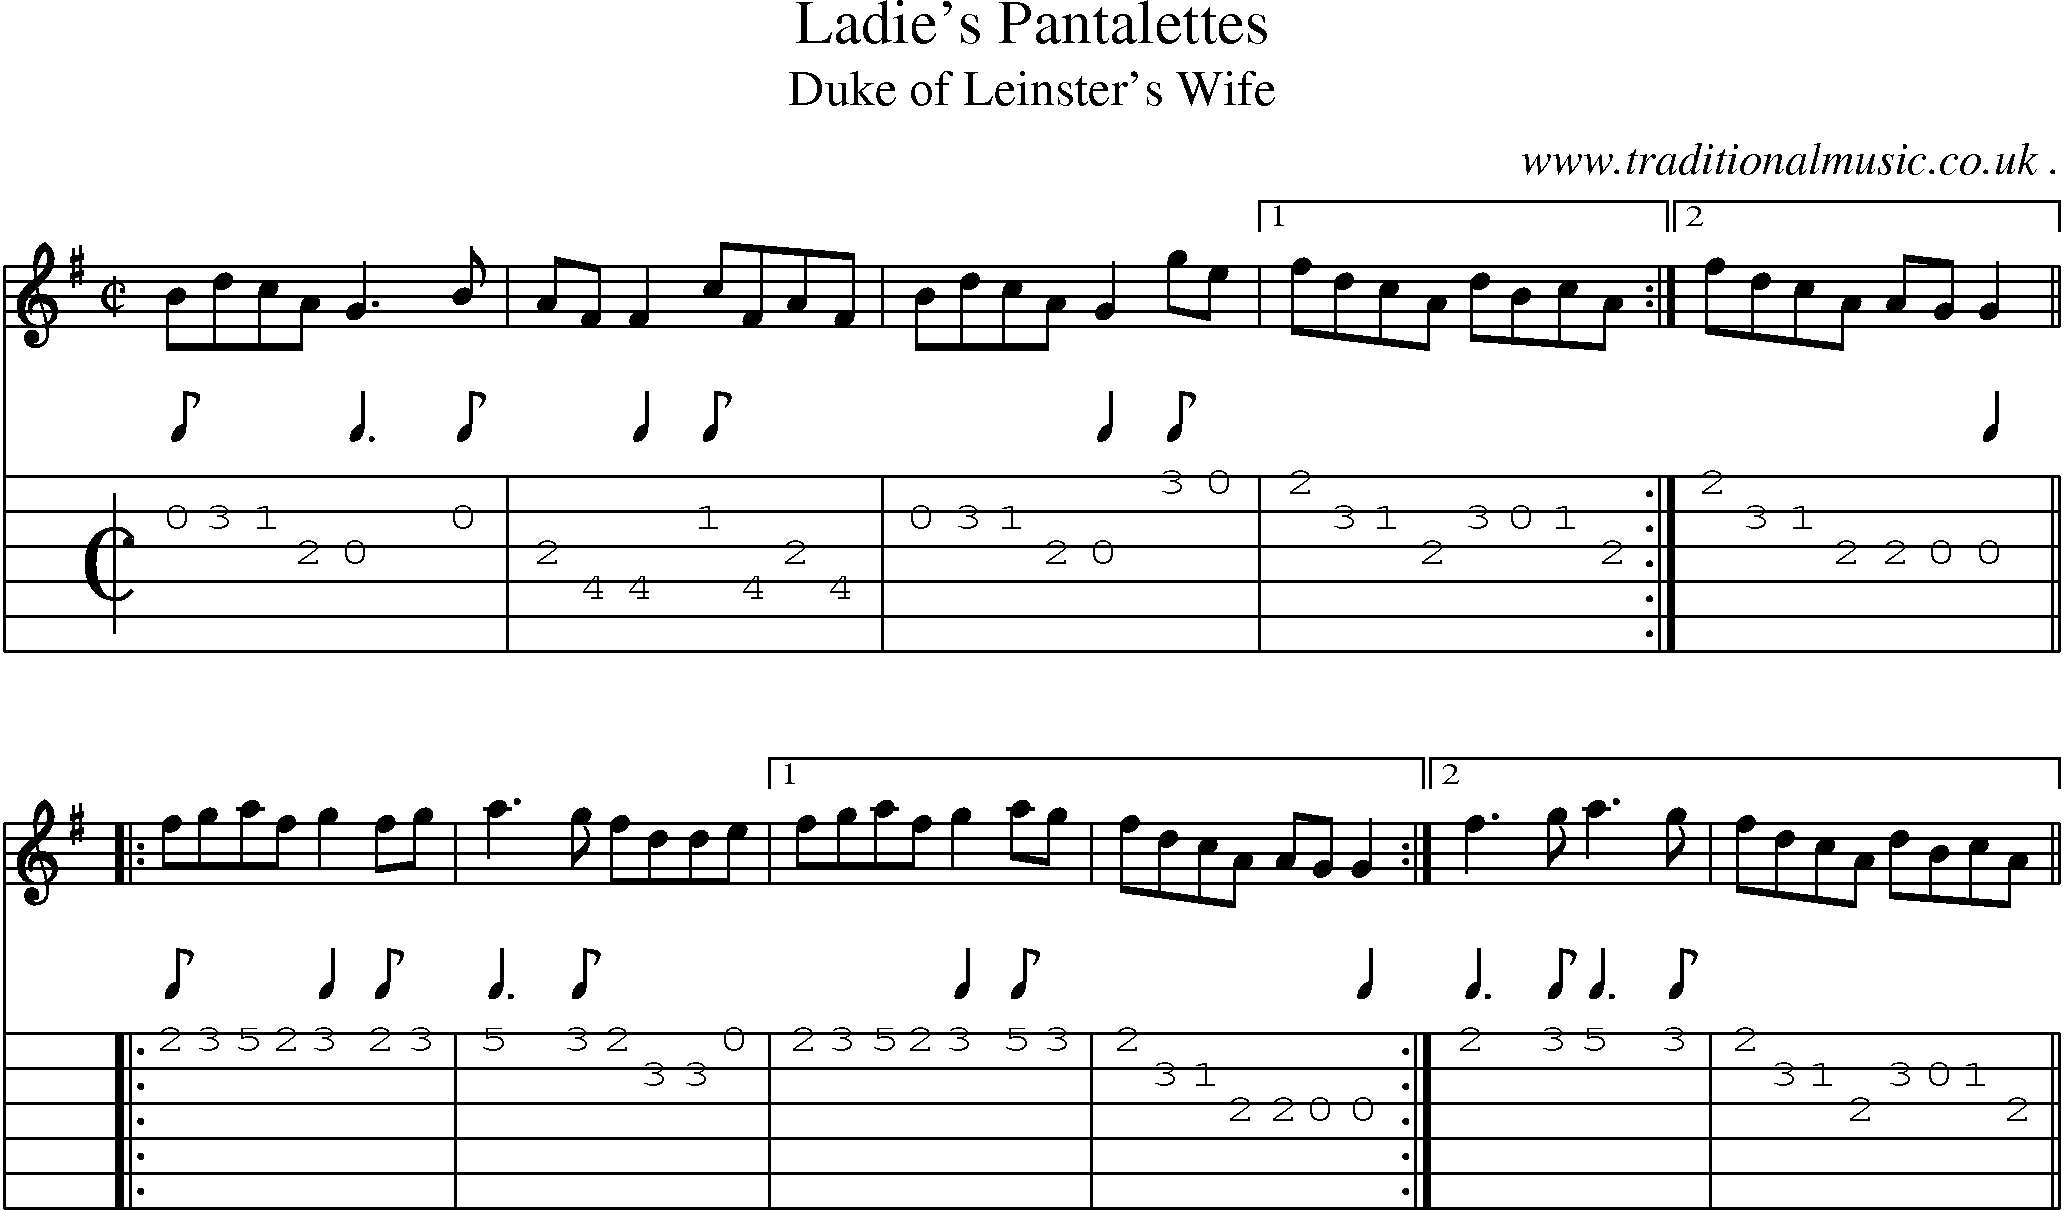 Sheet-Music and Guitar Tabs for Ladies Pantalettes